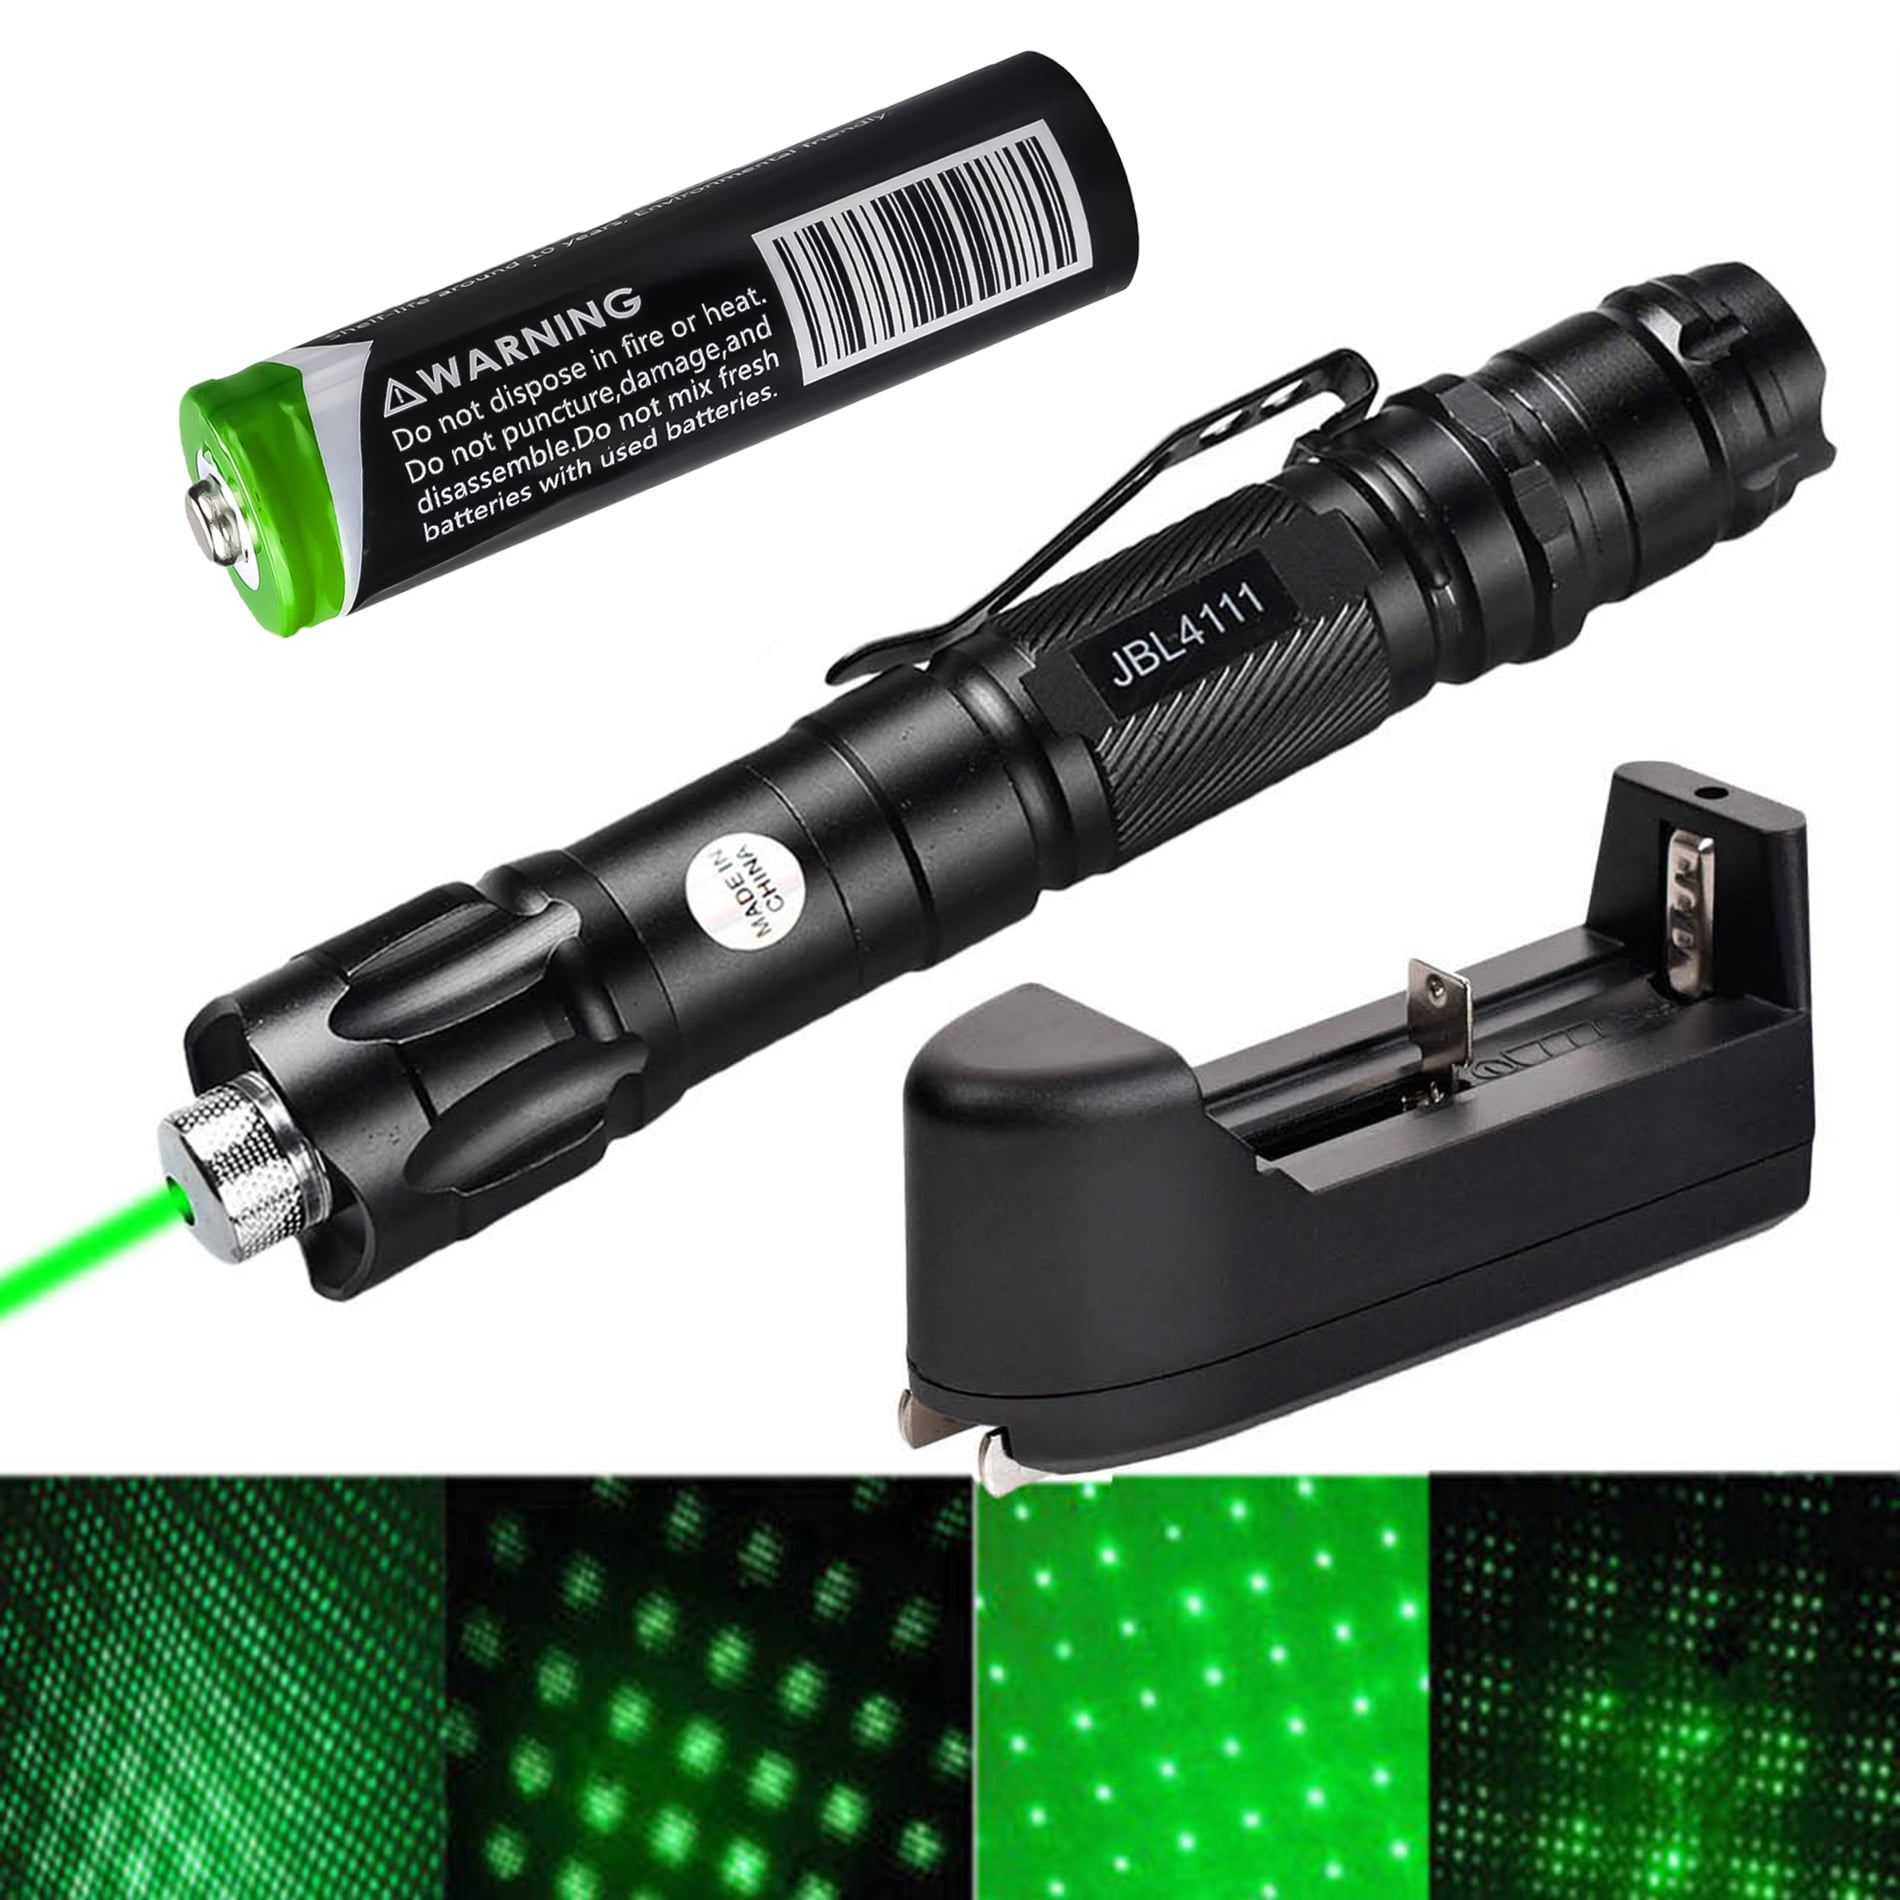 Green Laser Pointer Pen 20 Miles 1mW 532nm Beam High Power Lazer+Battery+Charger 